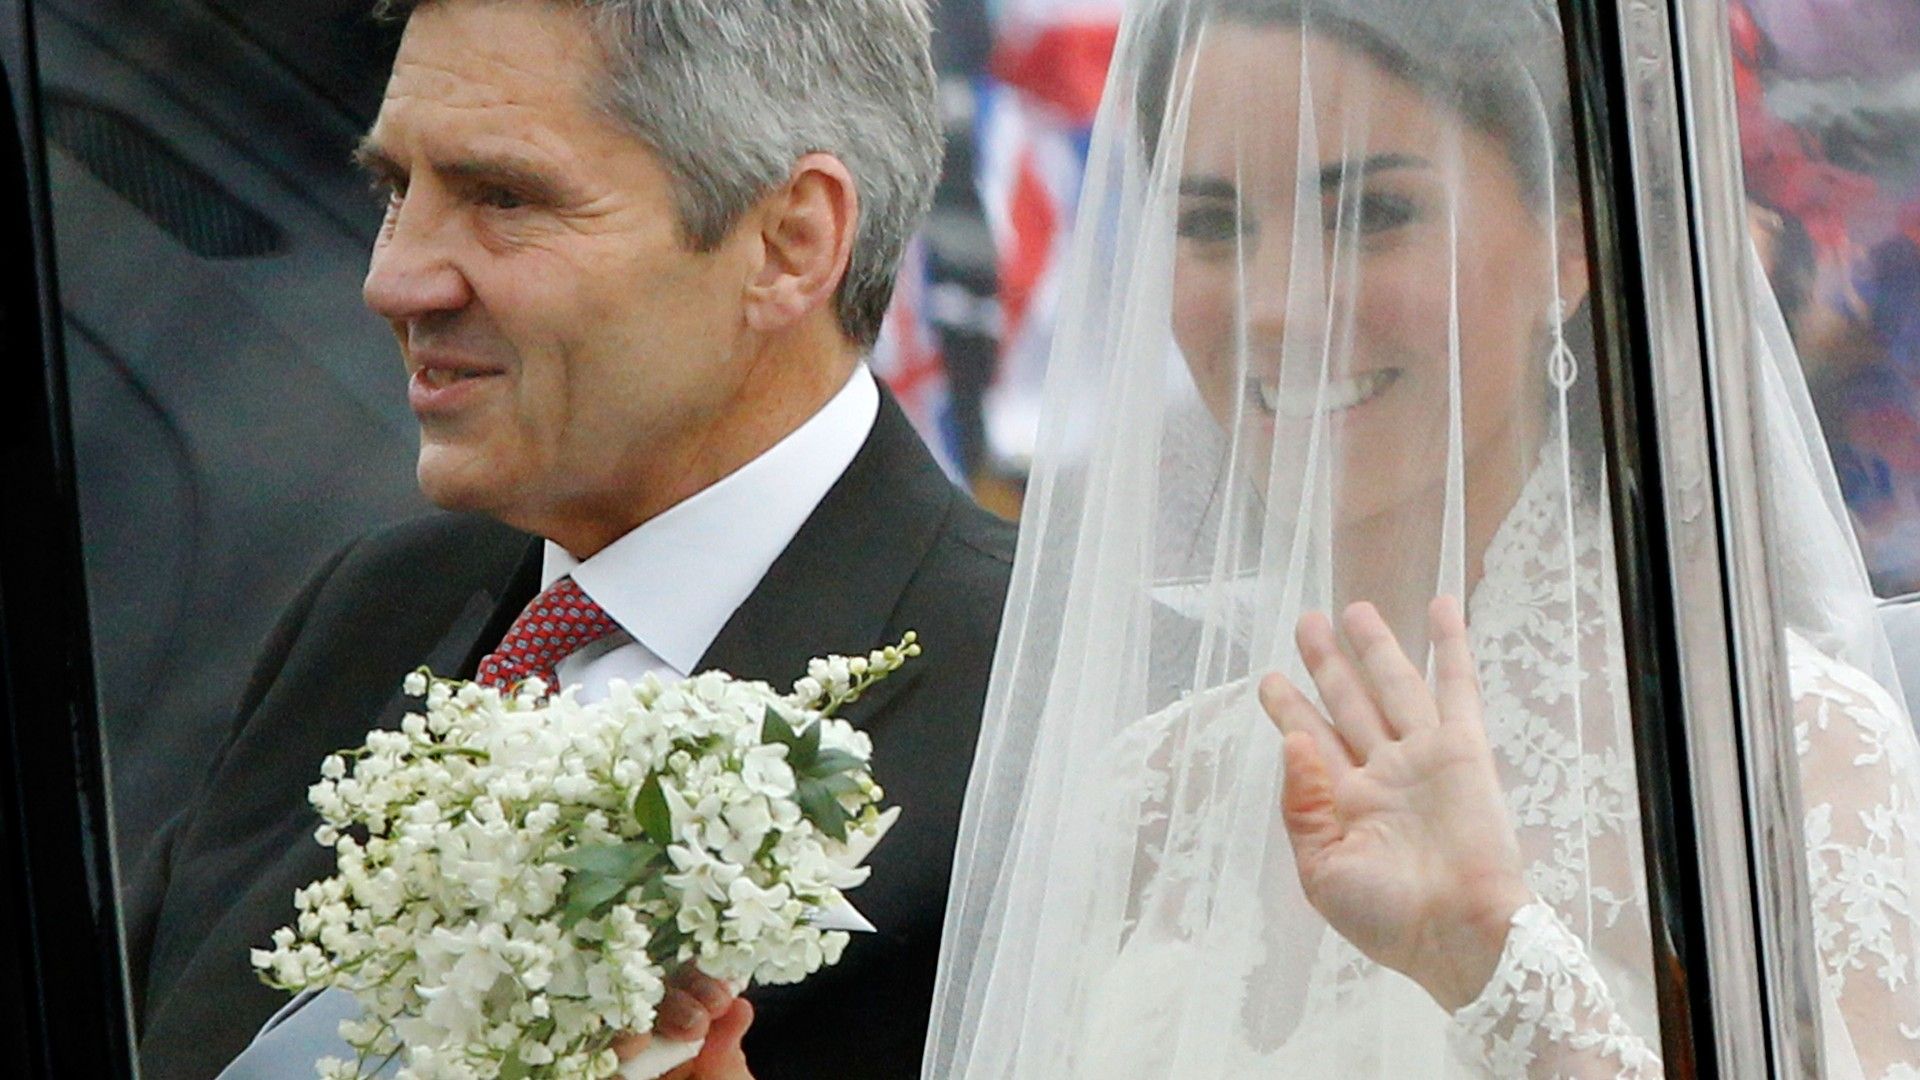 <p>                     It has become tradition for every royal bride to carry a spring of myrtle – a small delicate white flower – in her bridal bouquet on her wedding day, ever since Princess Victoria carried it during her wedding in 1858.                   </p>                                      <p>                     In fact, the myrtle used in her bouquet came from a bush specifically grown using sprigs from myrtle that were originally given to Queen Victoria, Princess Victoria’s mother, as a gift. Since then, it has featured as a part of every bride’s bouquet within the family - it formed a part of both Catherine and Meghan’s all-white florals, and Princess Diana’s enormous white bouquet, as well as Princess Eugenie's flowers and Zara Tindall's.                    </p>